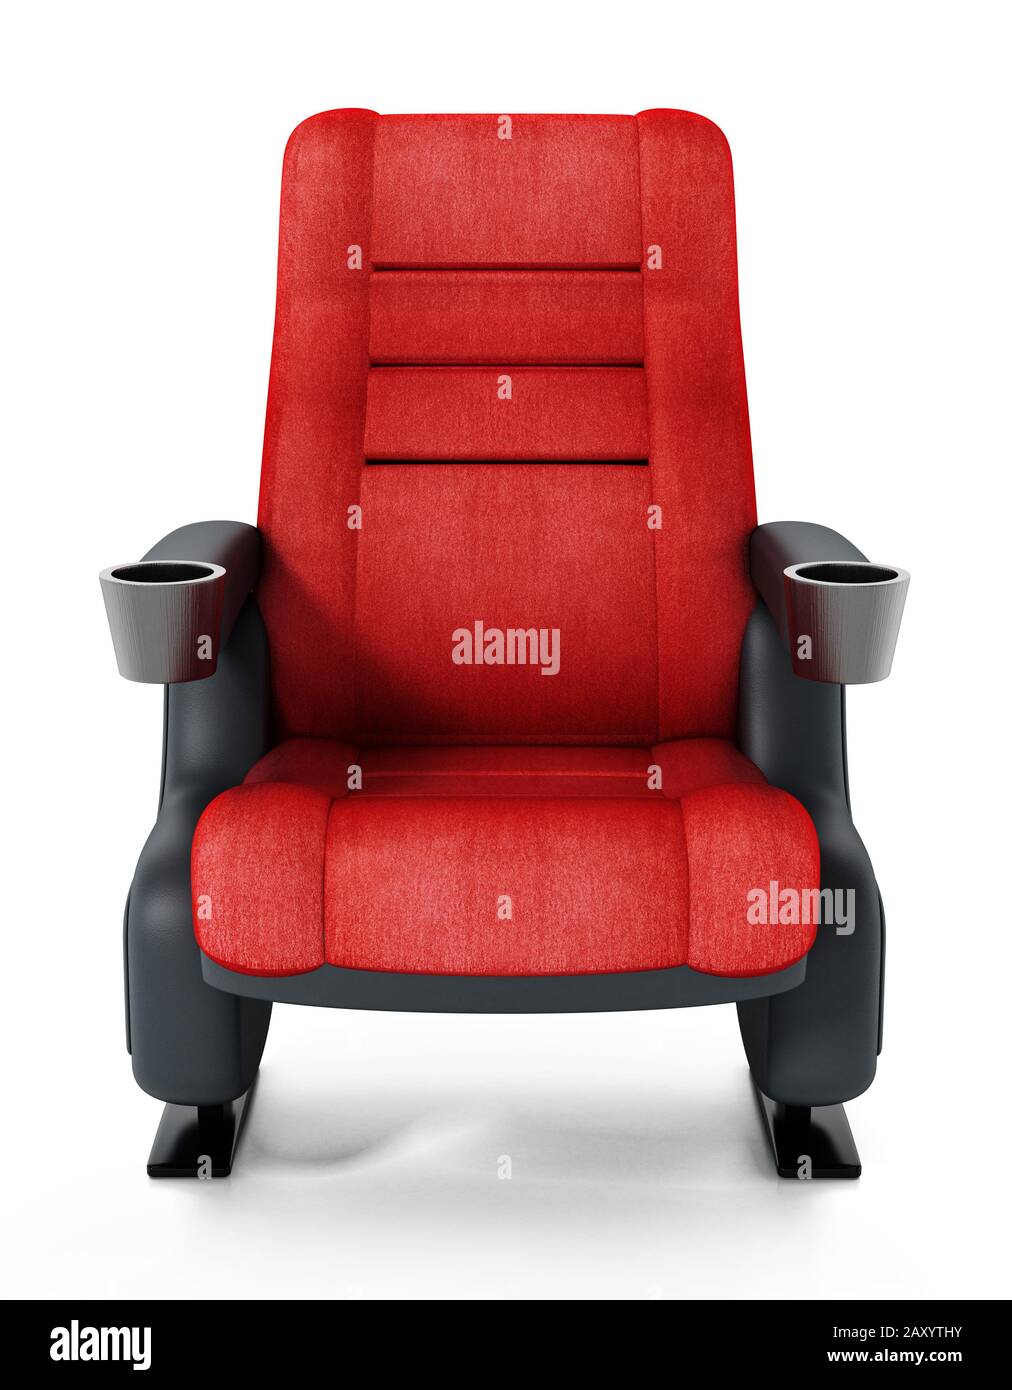 Red cinema chair isolated on white background. 3D illustration. Stock Photo